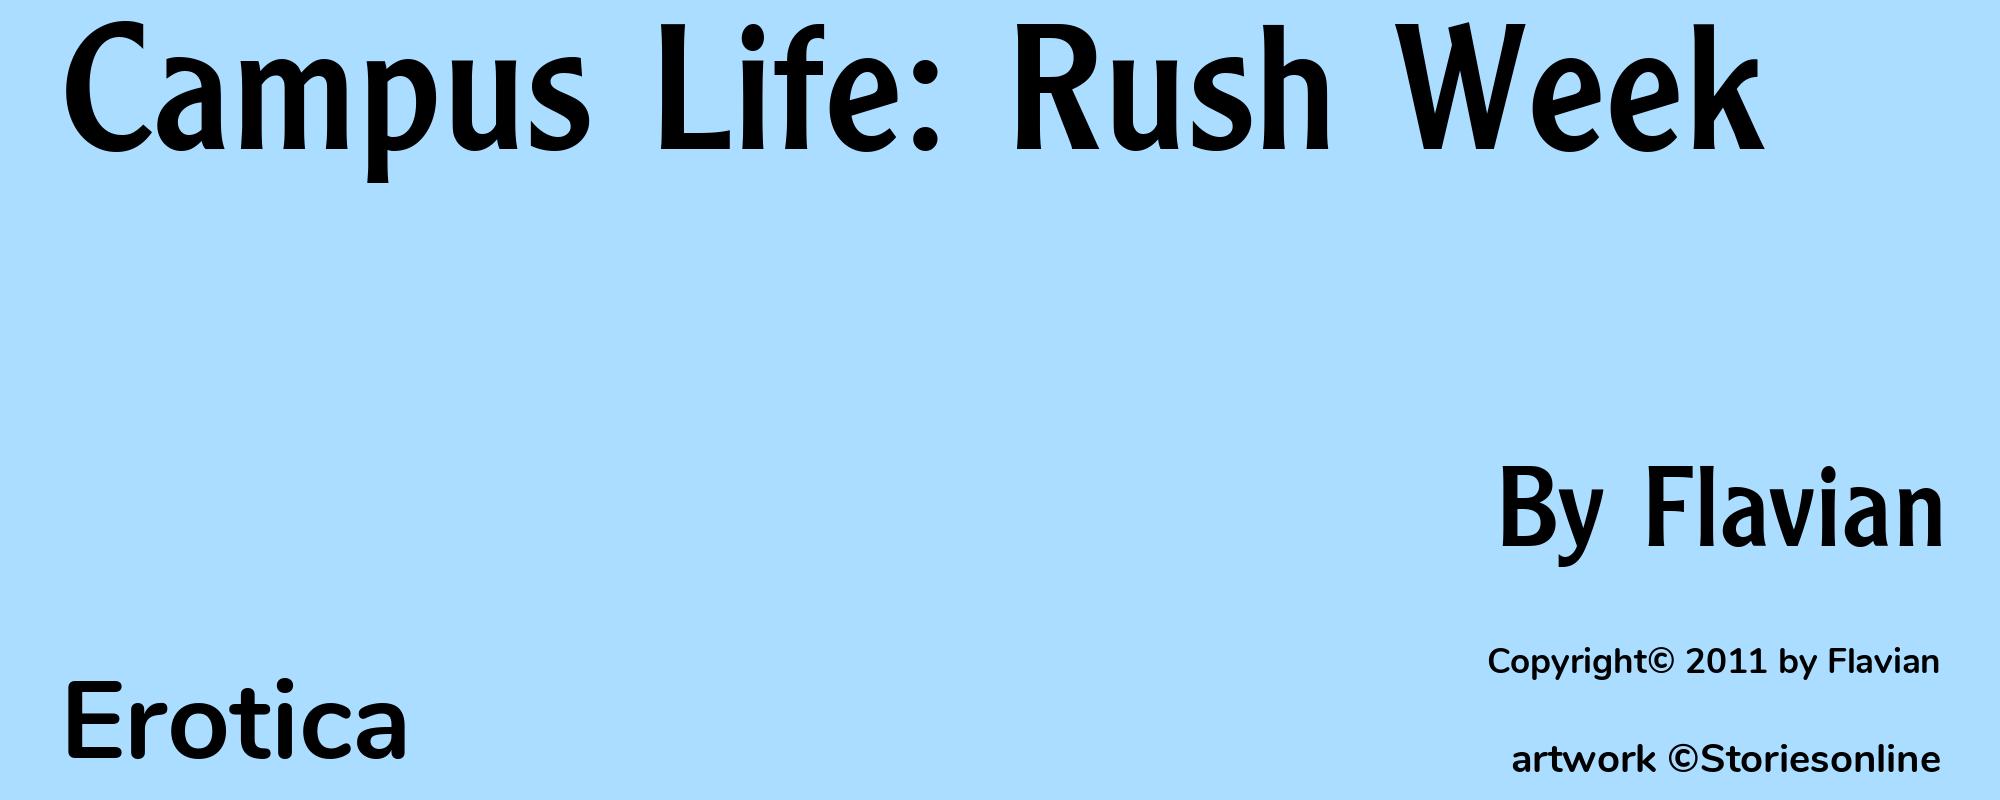 Campus Life: Rush Week - Cover